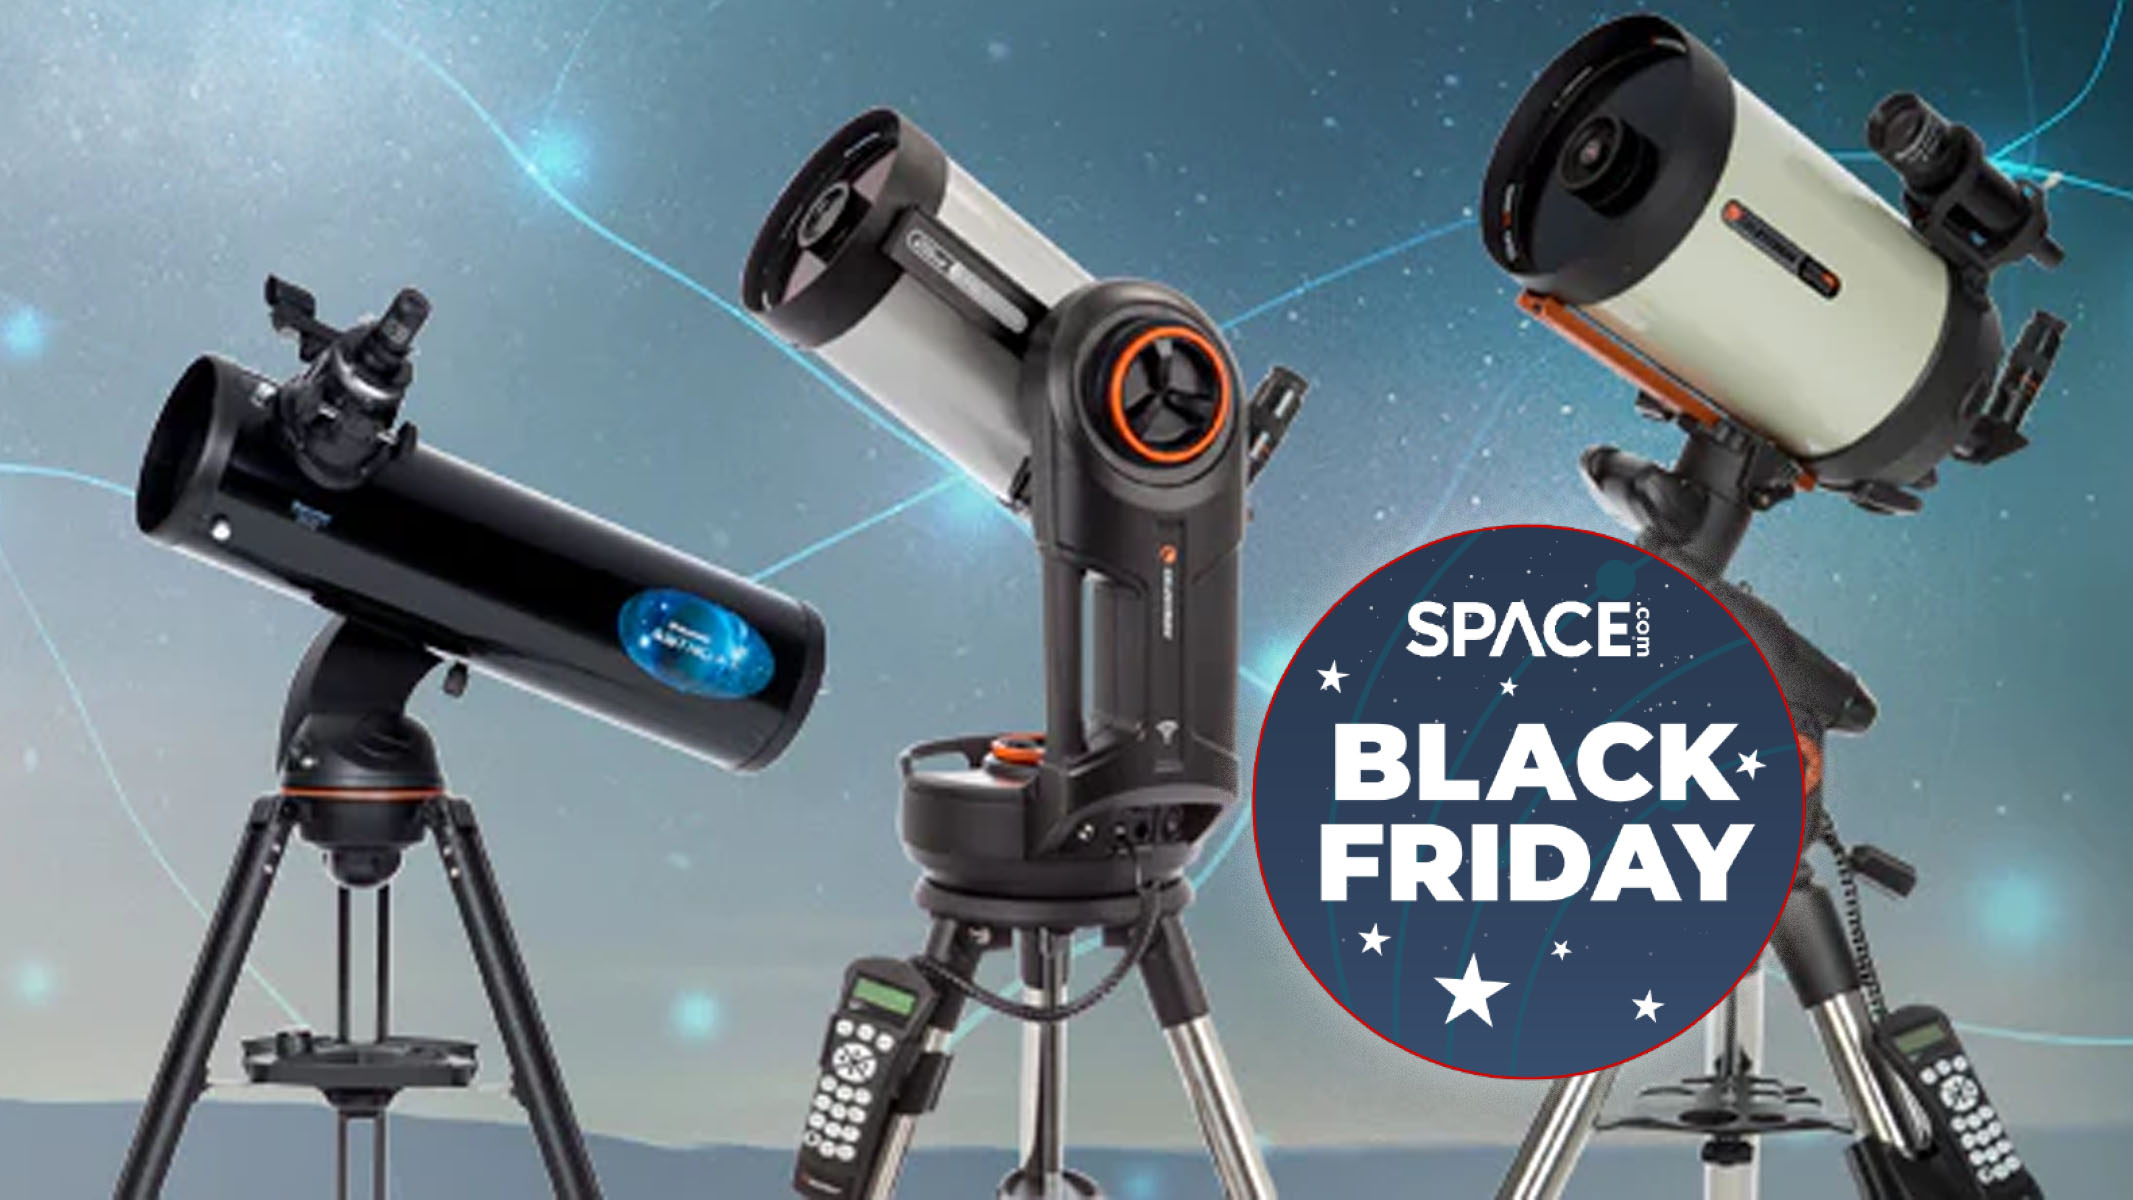 Black Friday Deals live now: Telescopes, VR headsets, Lego and more thumbnail